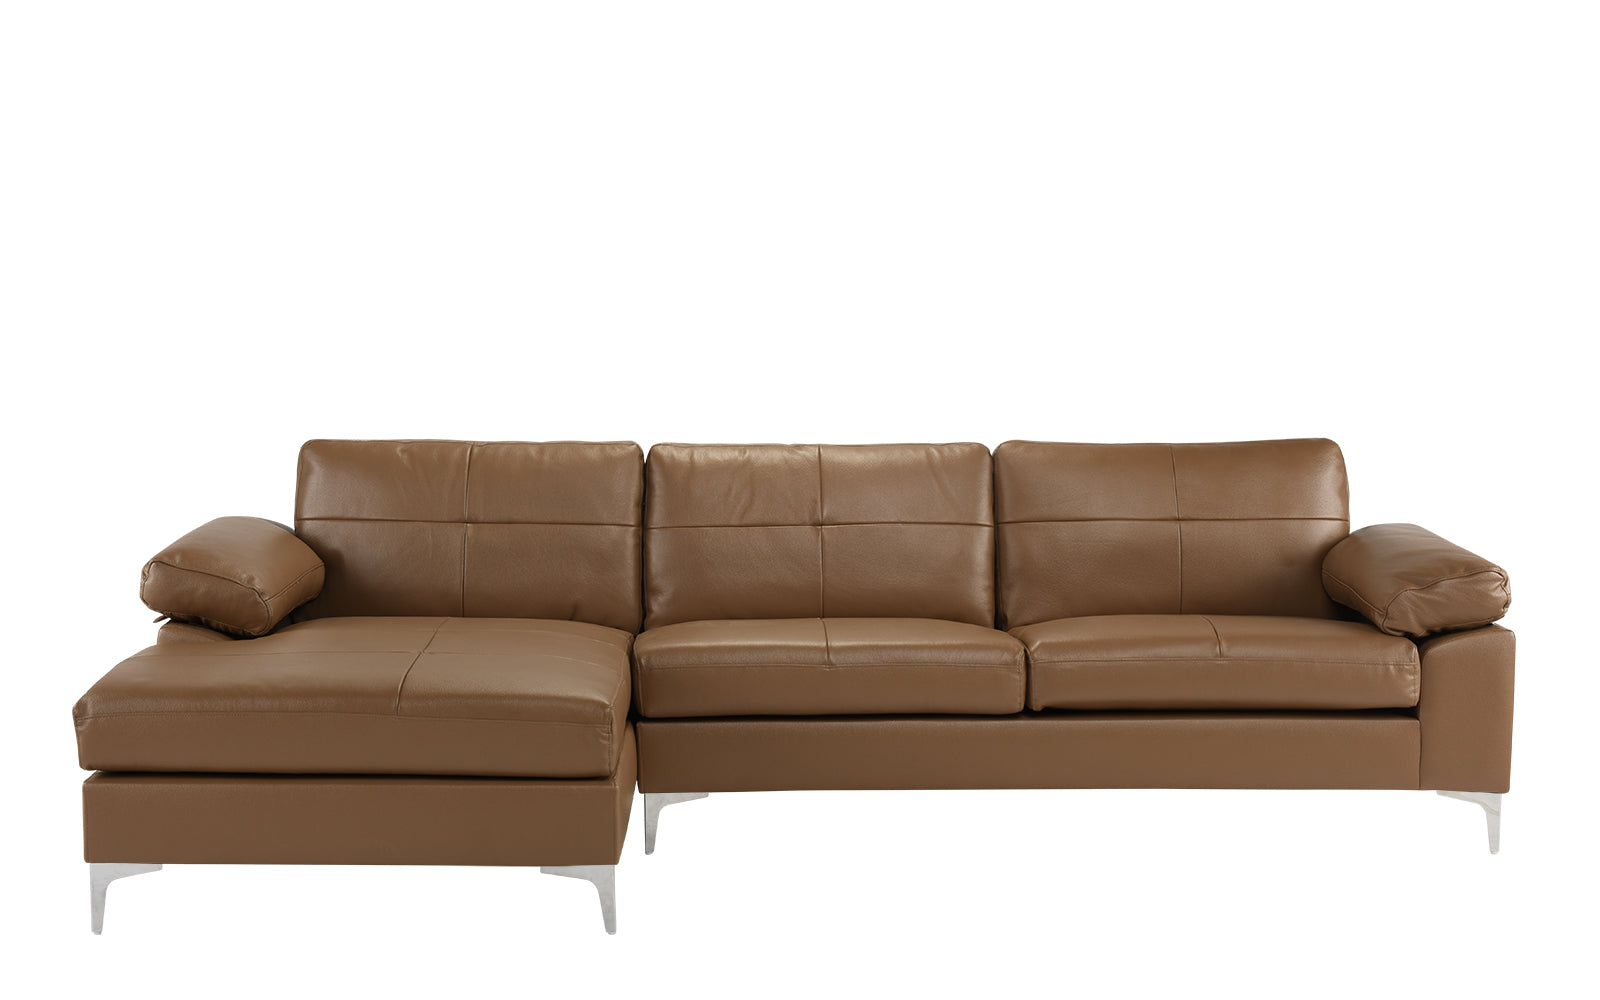 Mai Modern Leather Match Low Profile L-Shape Sectional Sofa with Left Chaise